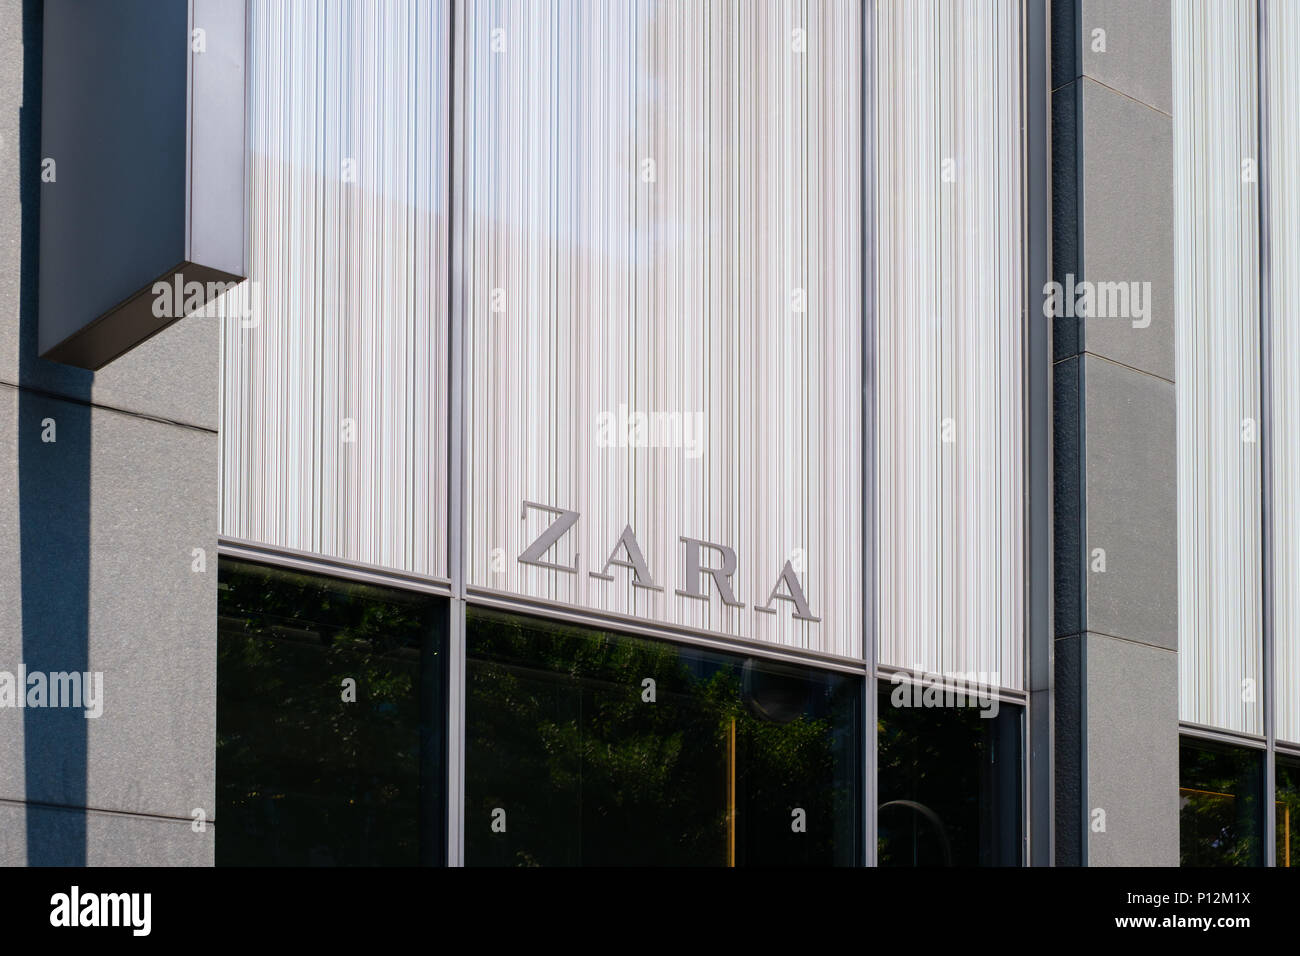 Berlin, Germany - june 09, 2018: The logo / brand name of  ZARA on shop facade exterior in Berlin, Germany.  Zara is a Spanish  fashion, clothing and  Stock Photo